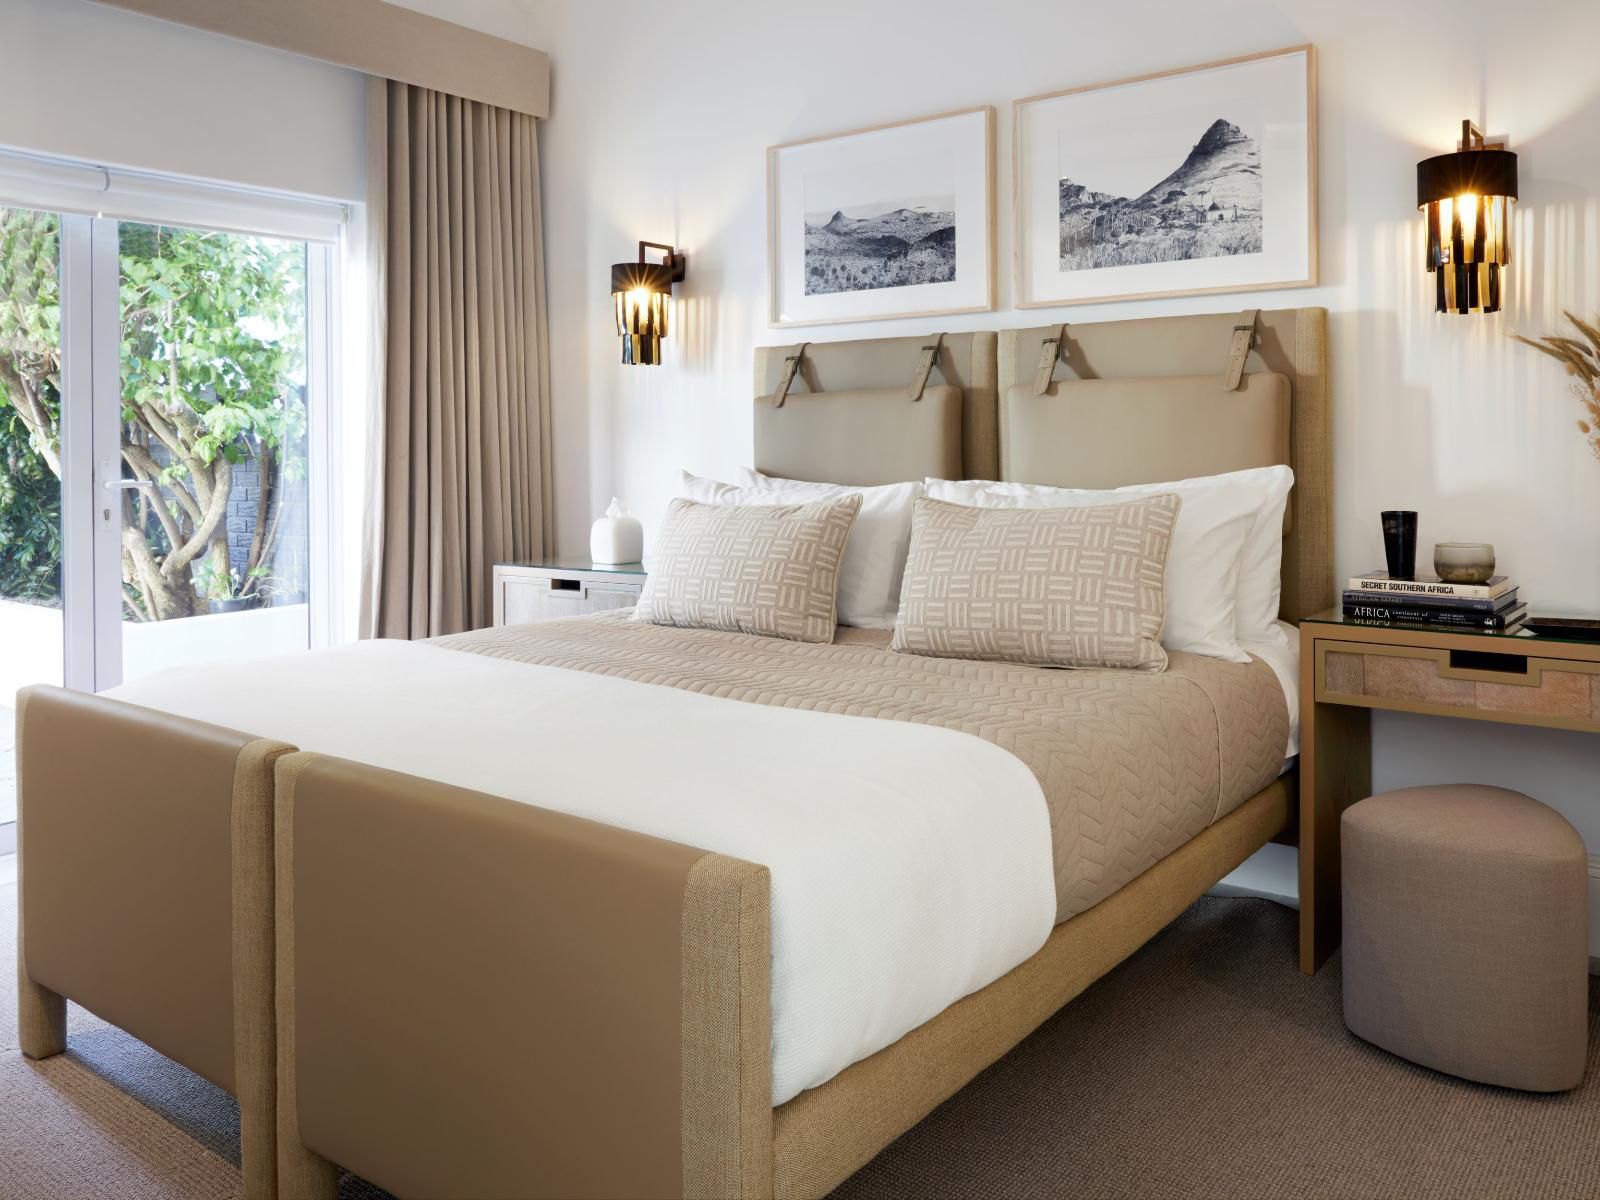 Kaap Mooi Luxury Guest House Tamboerskloof Cape Town Western Cape South Africa Bedroom